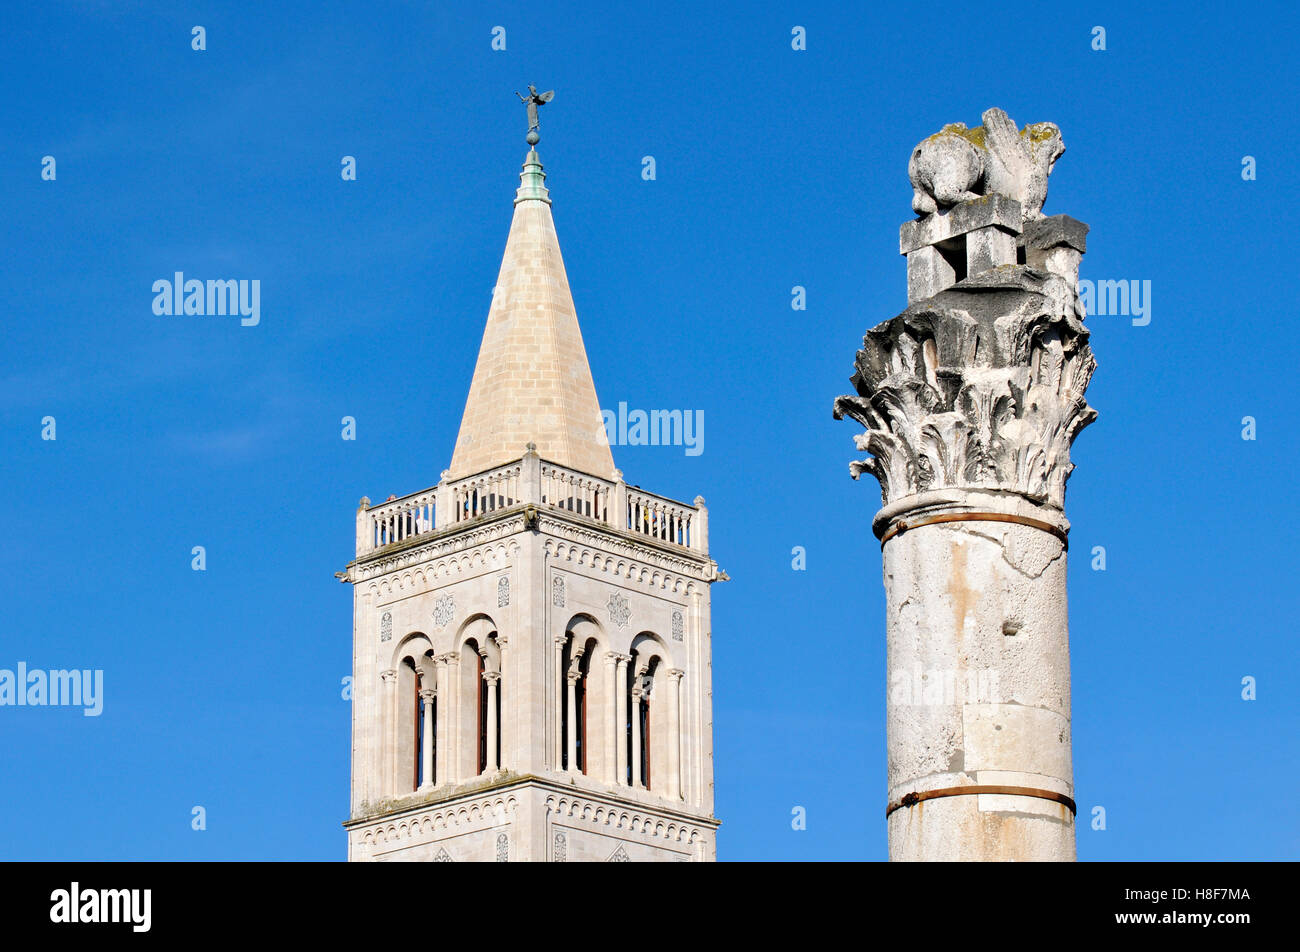 Detail of Campanile, bell tower, of Cathedral of St Anastasia and Roman column at Forum of Zadar, Dalmatia, Croatia, Europe Stock Photo